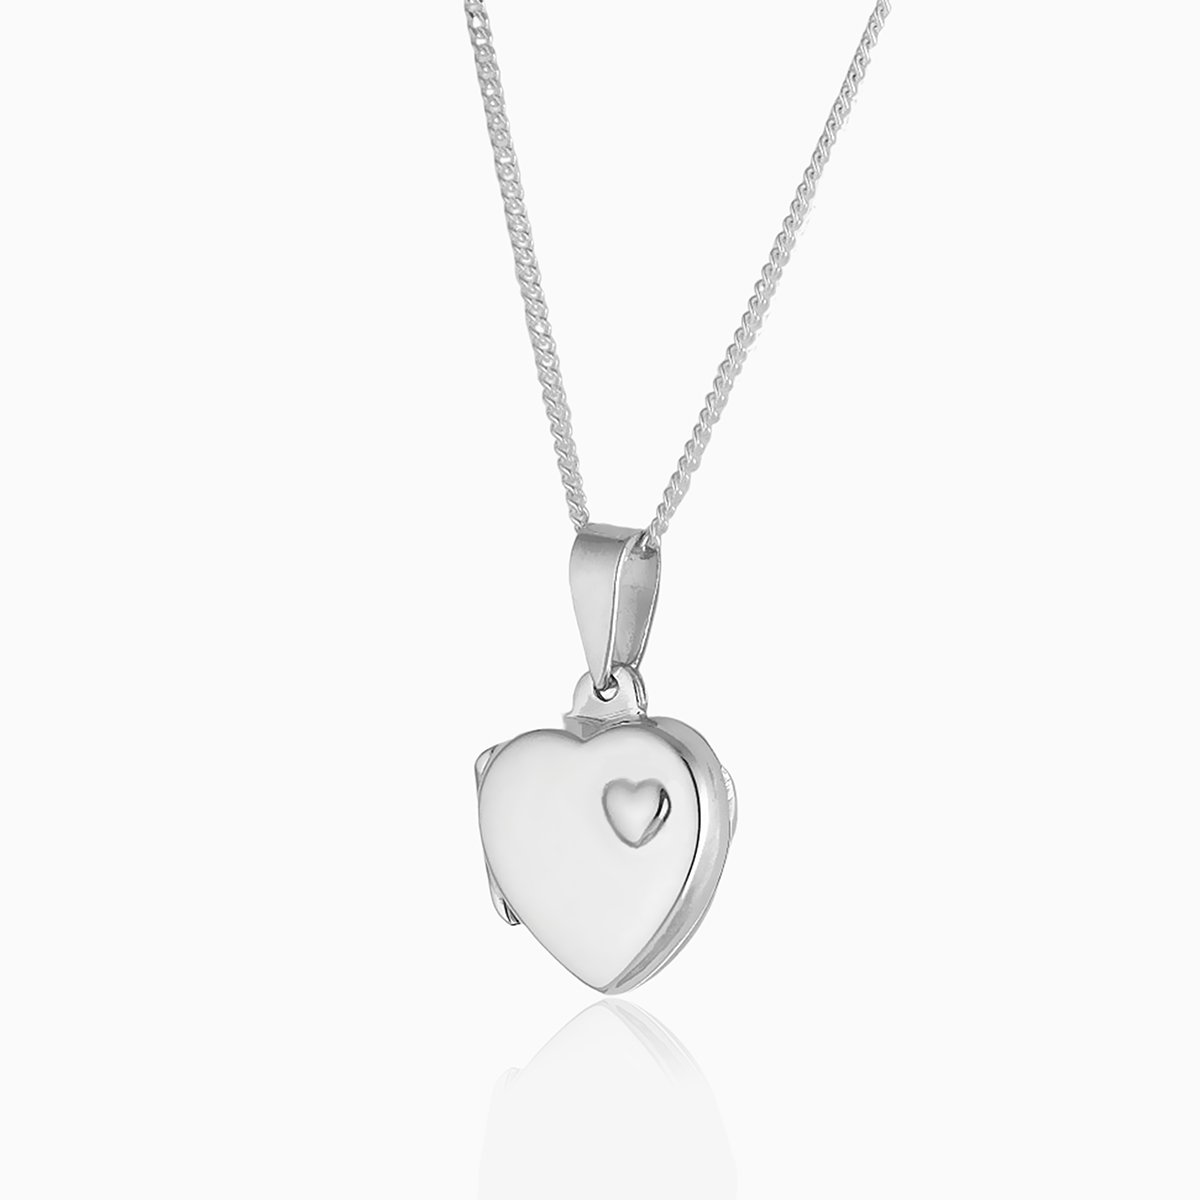 Product title: Heart Accent Locket, product type: Locket